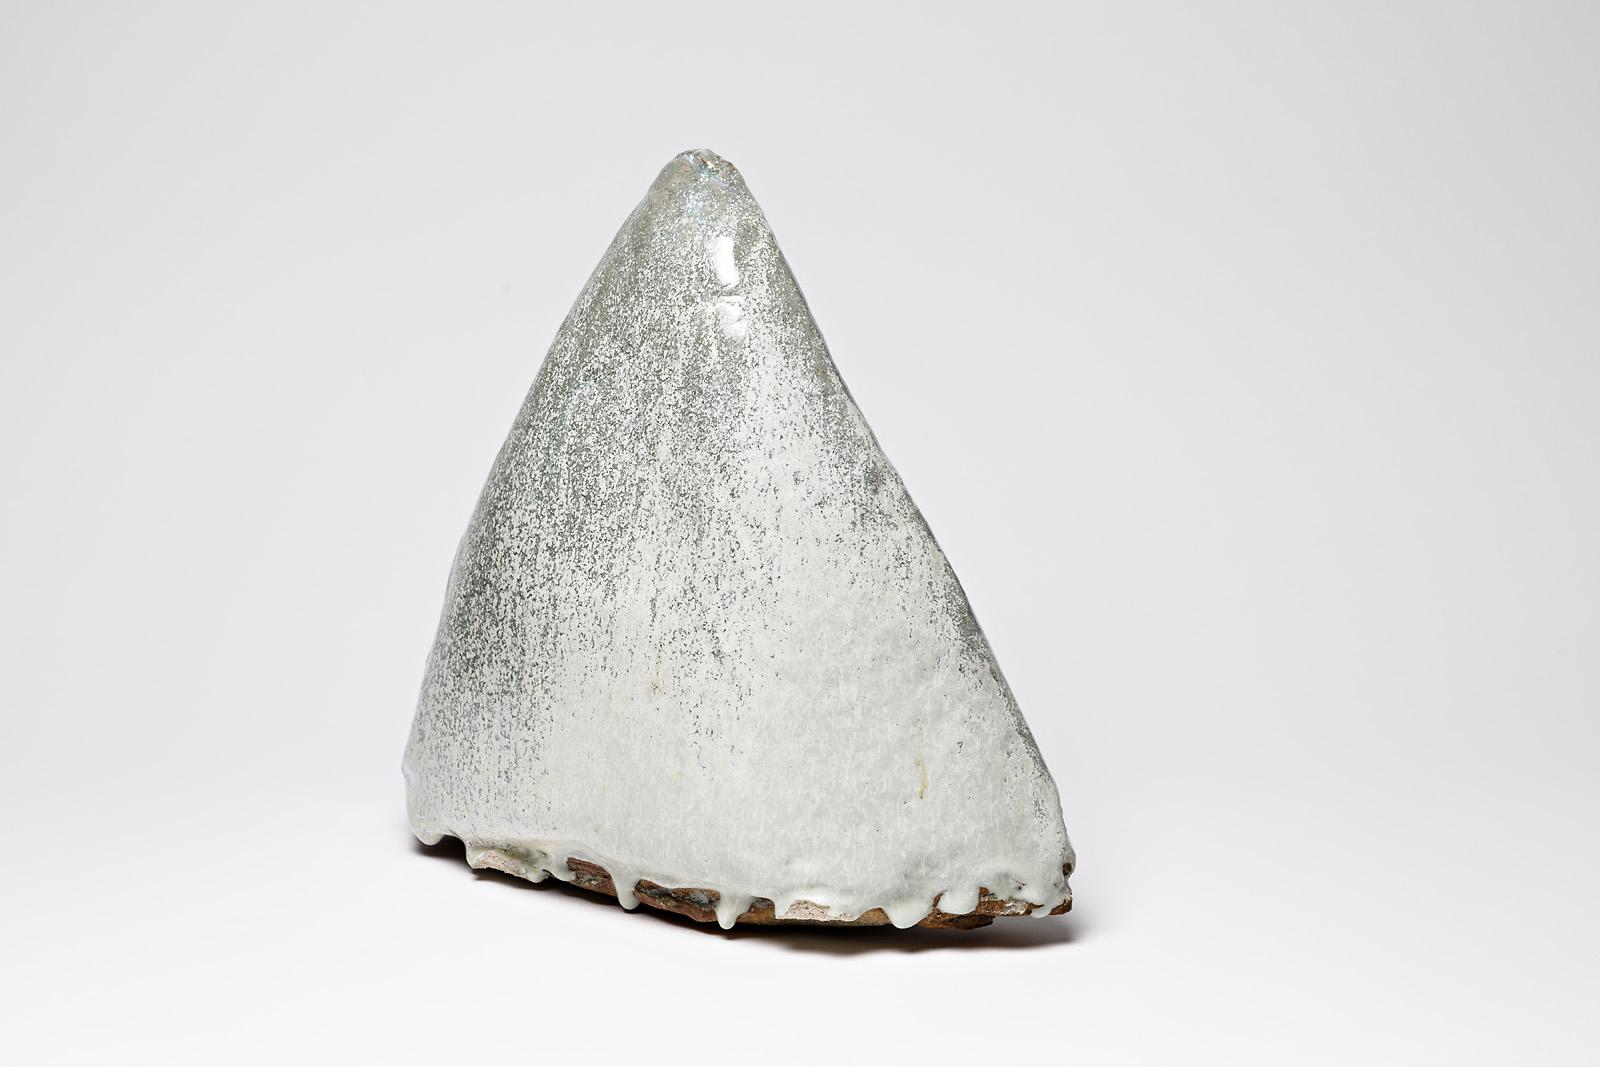 French White and Grey Stoneware Ceramic Sculpture by Bernard Dejonghe Contemporary Art For Sale